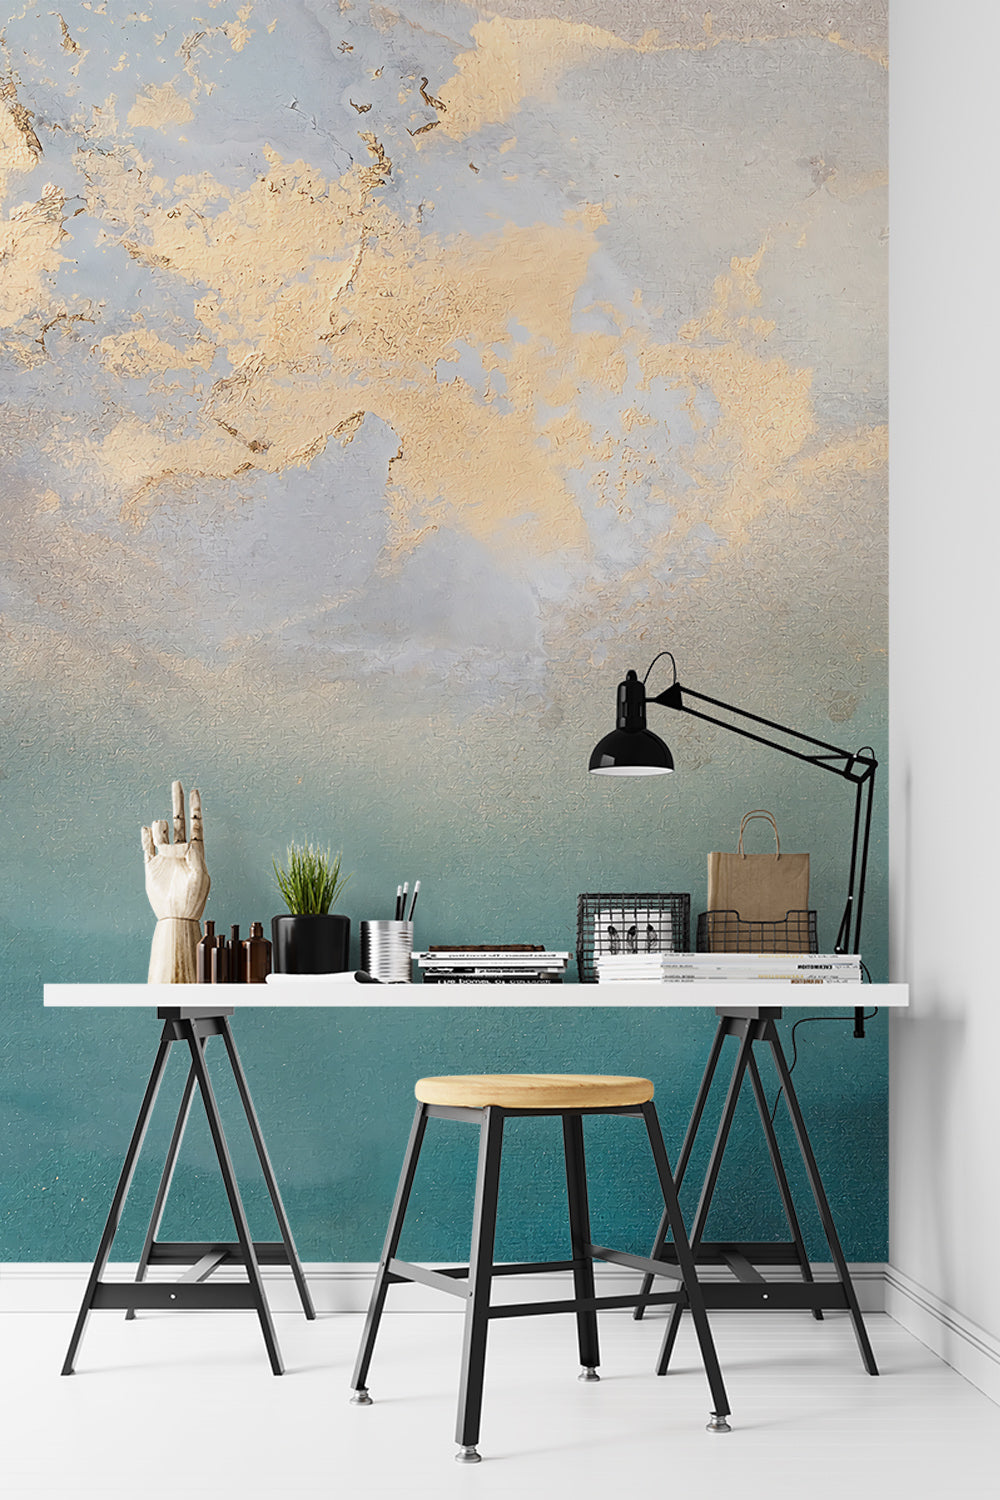 Blue Sea Gold Cloud Painting Wallpaper Mural, Seaside Sky Self-Adhesive Peel And Stick 3D Wall Decor, Designer Removable Wall Decor